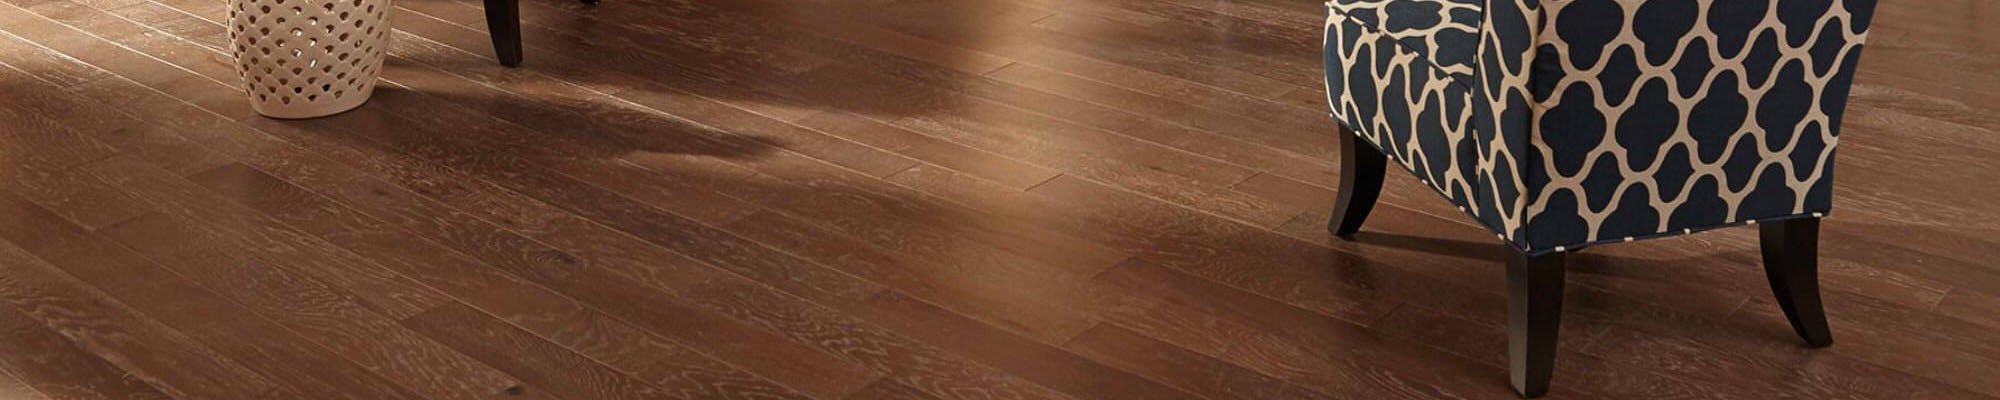 Learn more about the Hardwood refinishing services offered by A&E Flooring in Collegeville, PA.